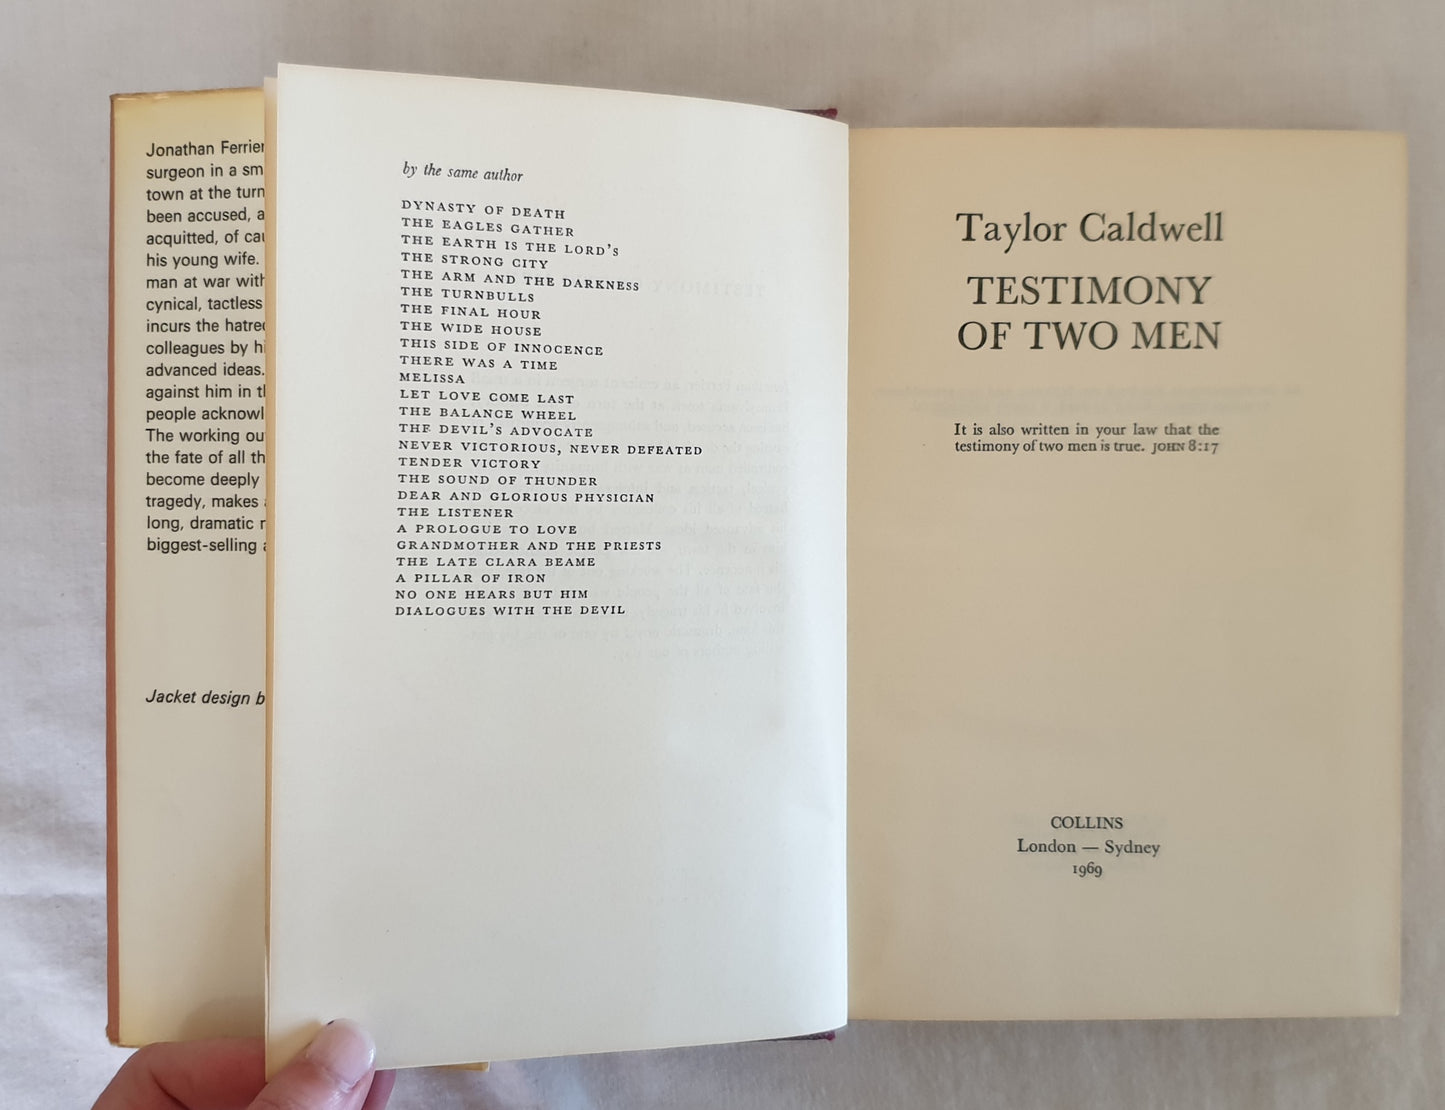 Testimony of Two Men by Taylor Caldwell